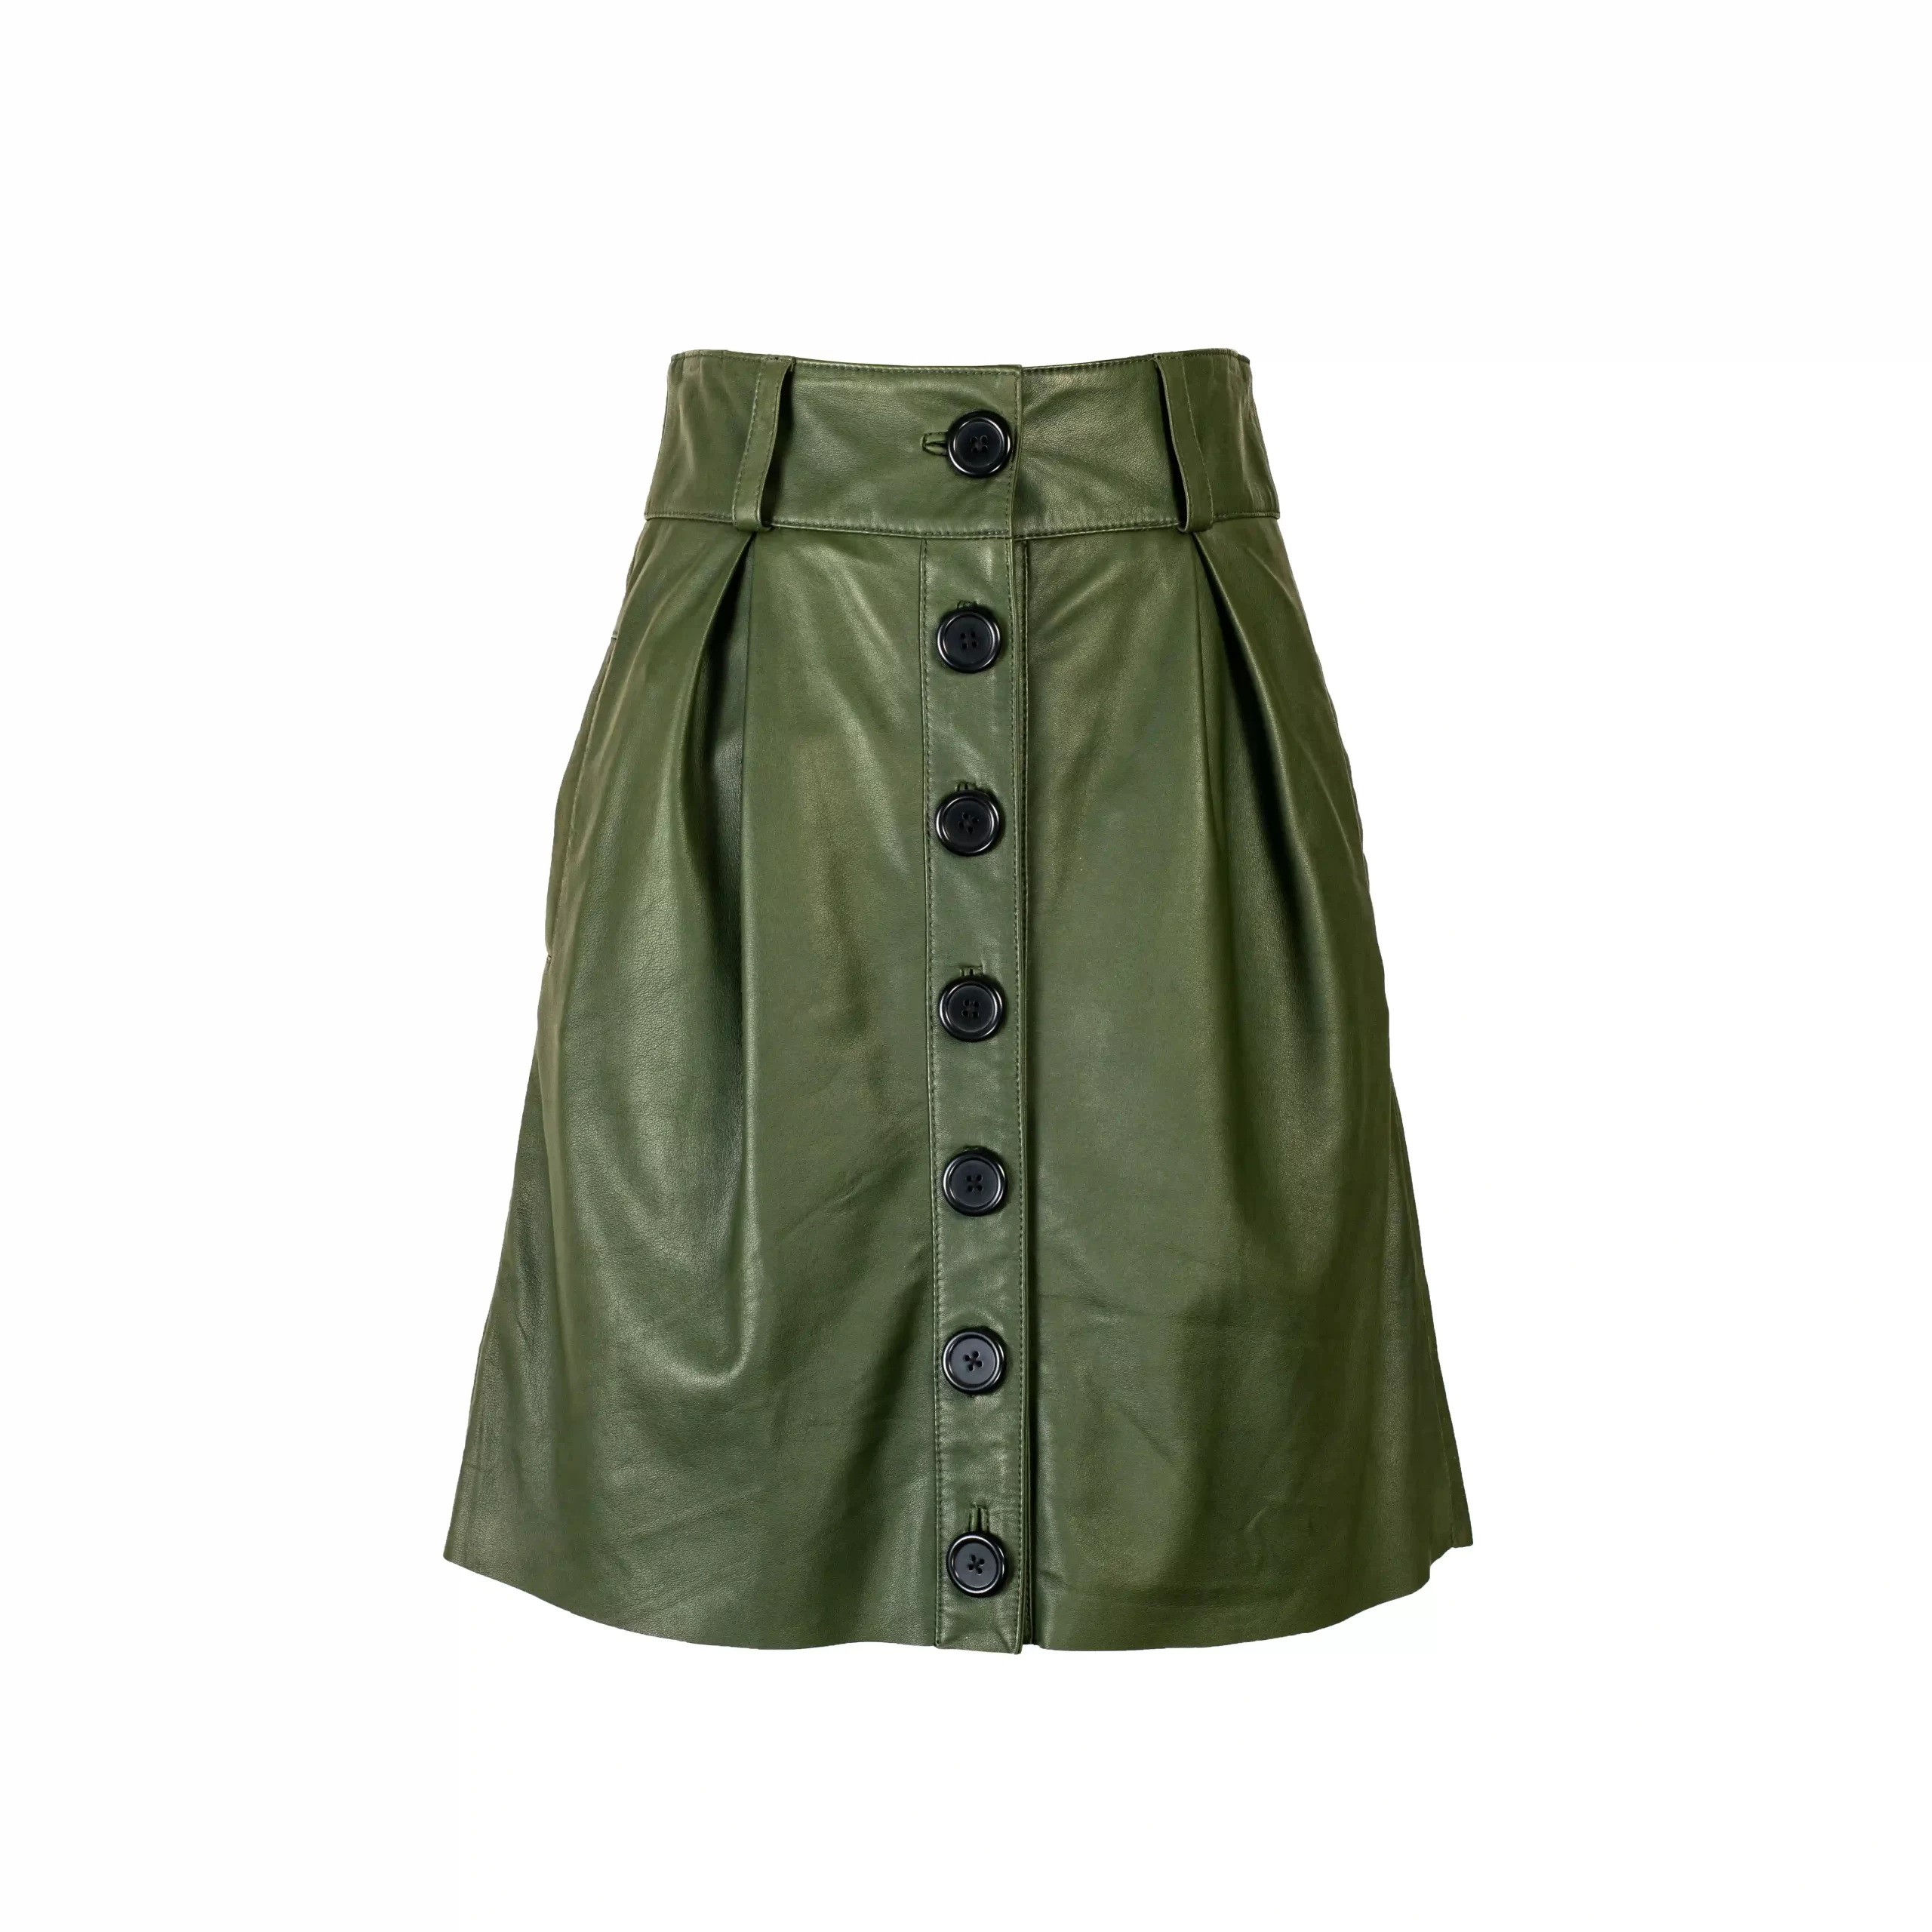 LEATHER SKIRT WITH BIG BUTTONS IN THE FRONT